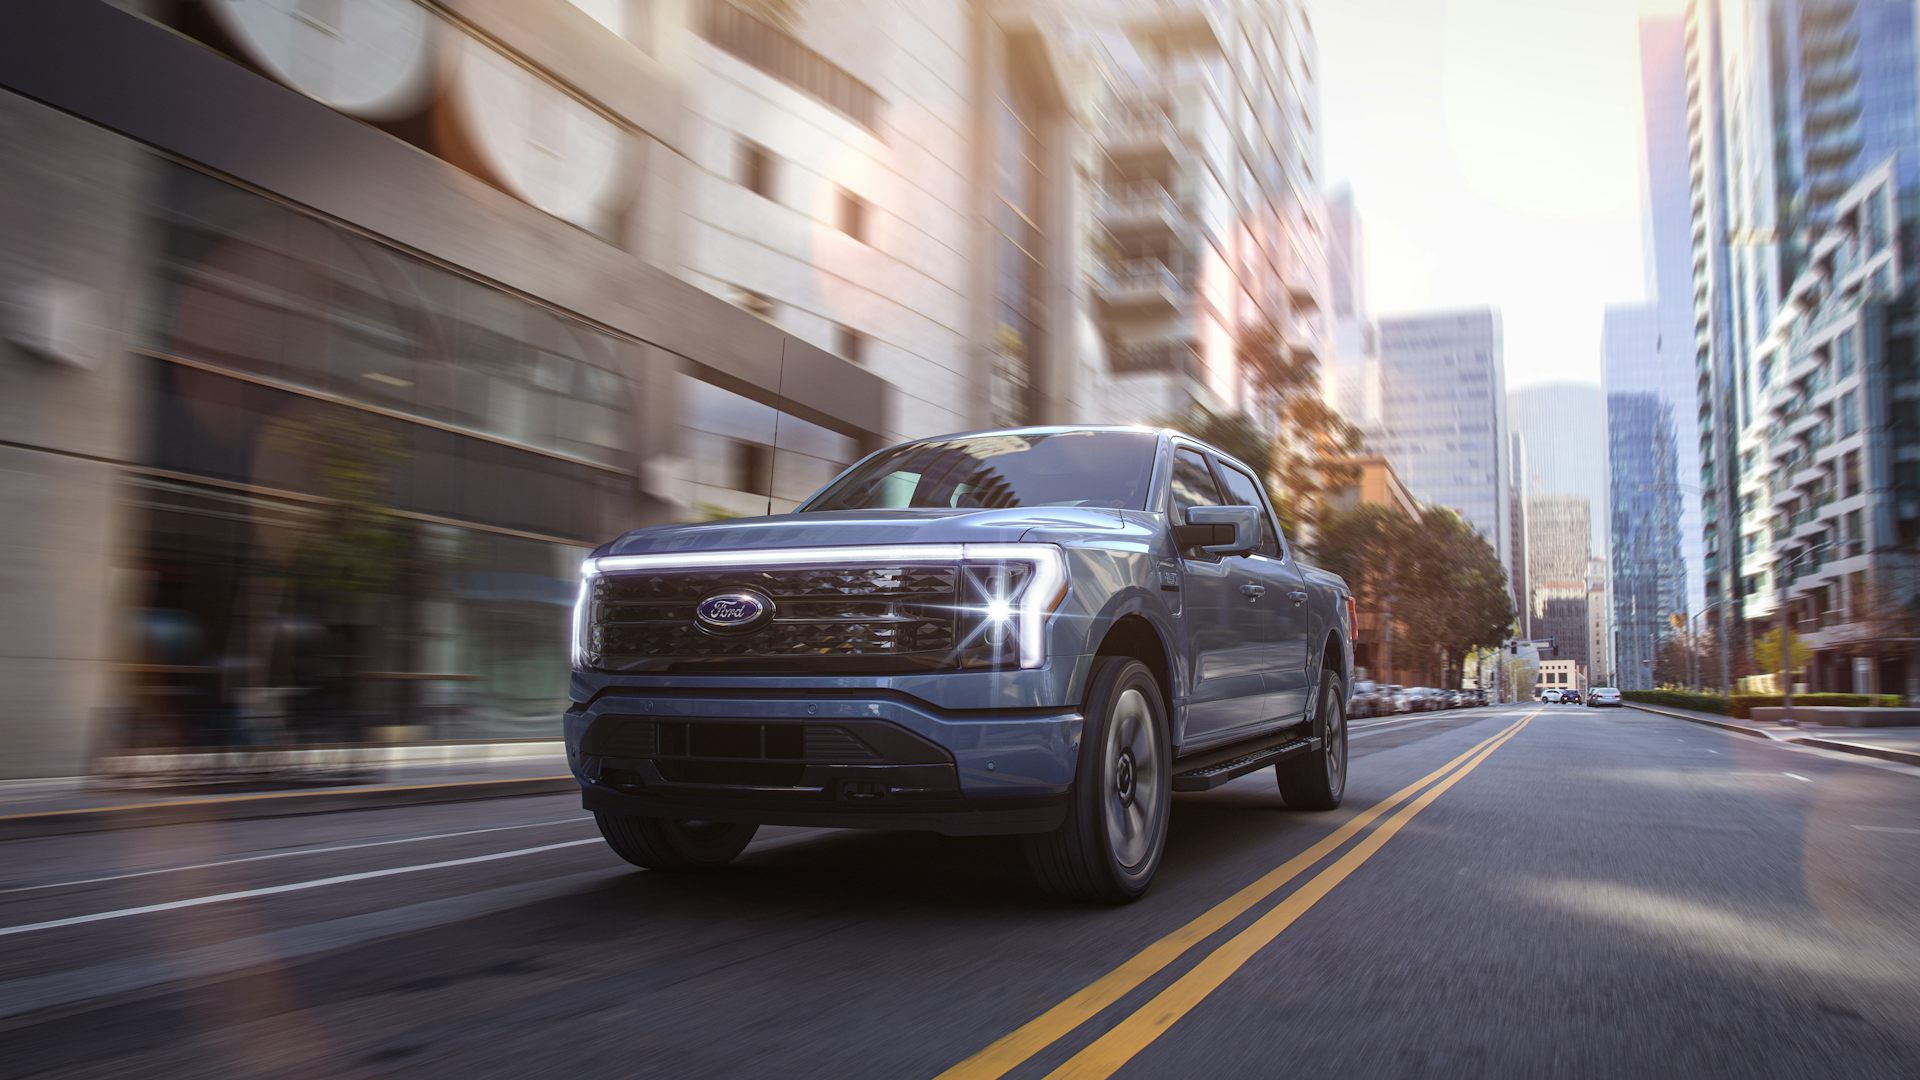 With Ford’s Electric F-150 Pickup, the EV Transition Shifts into High Gear